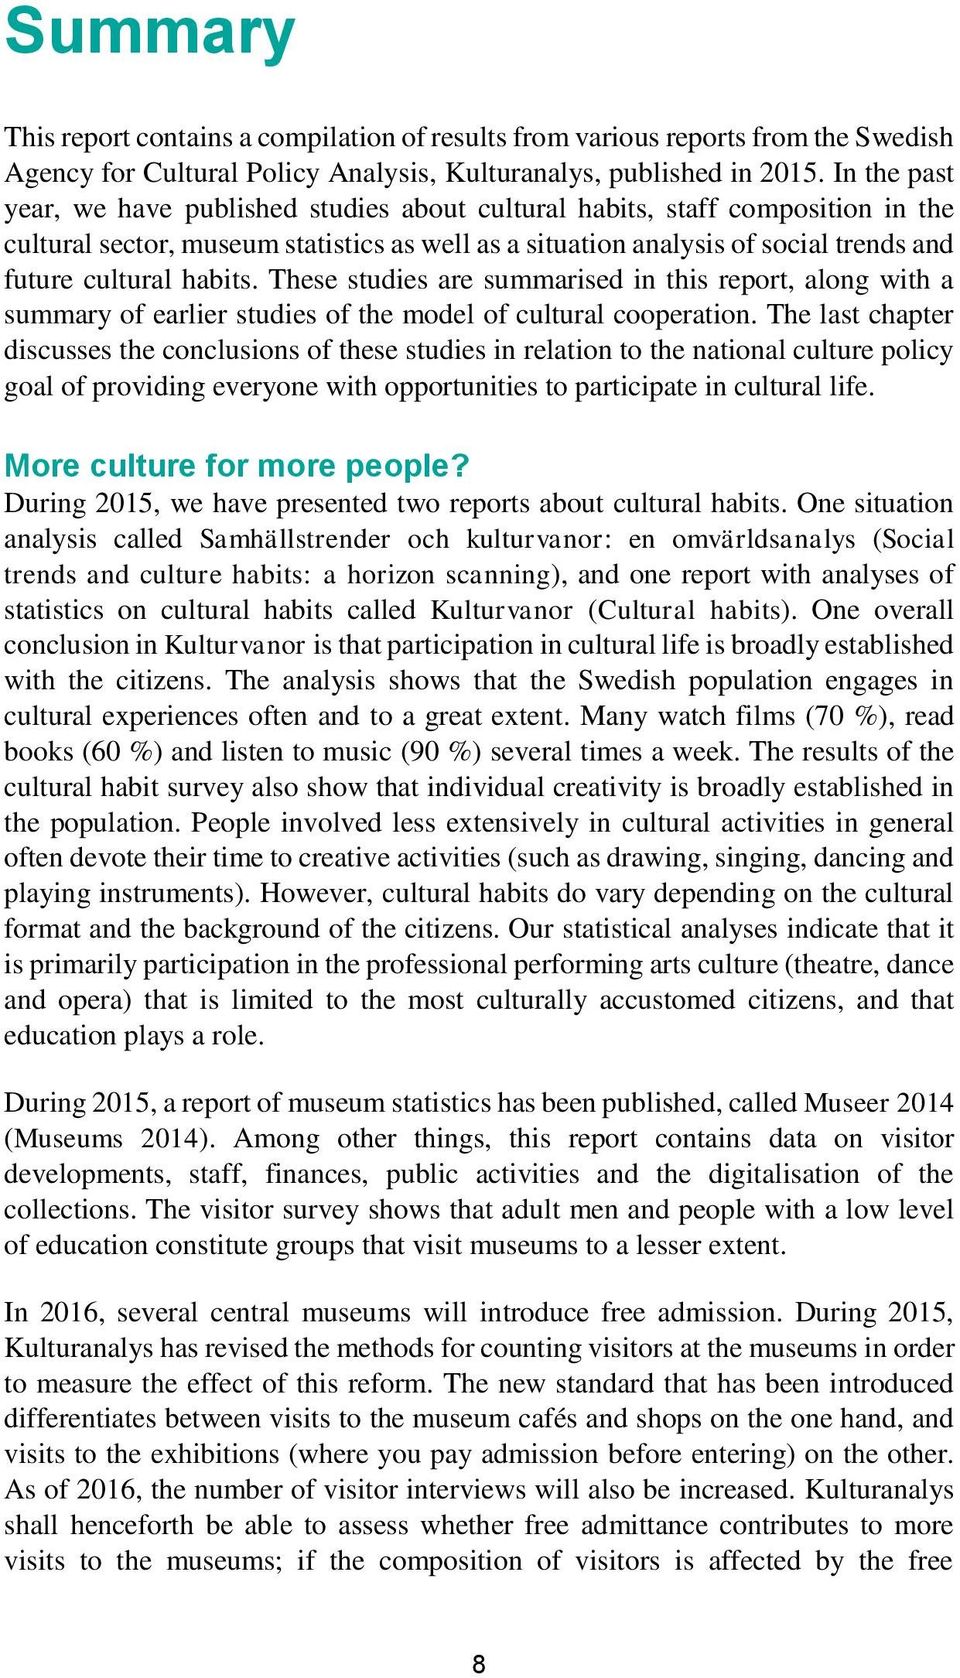 habits. These studies are summarised in this report, along with a summary of earlier studies of the model of cultural cooperation.